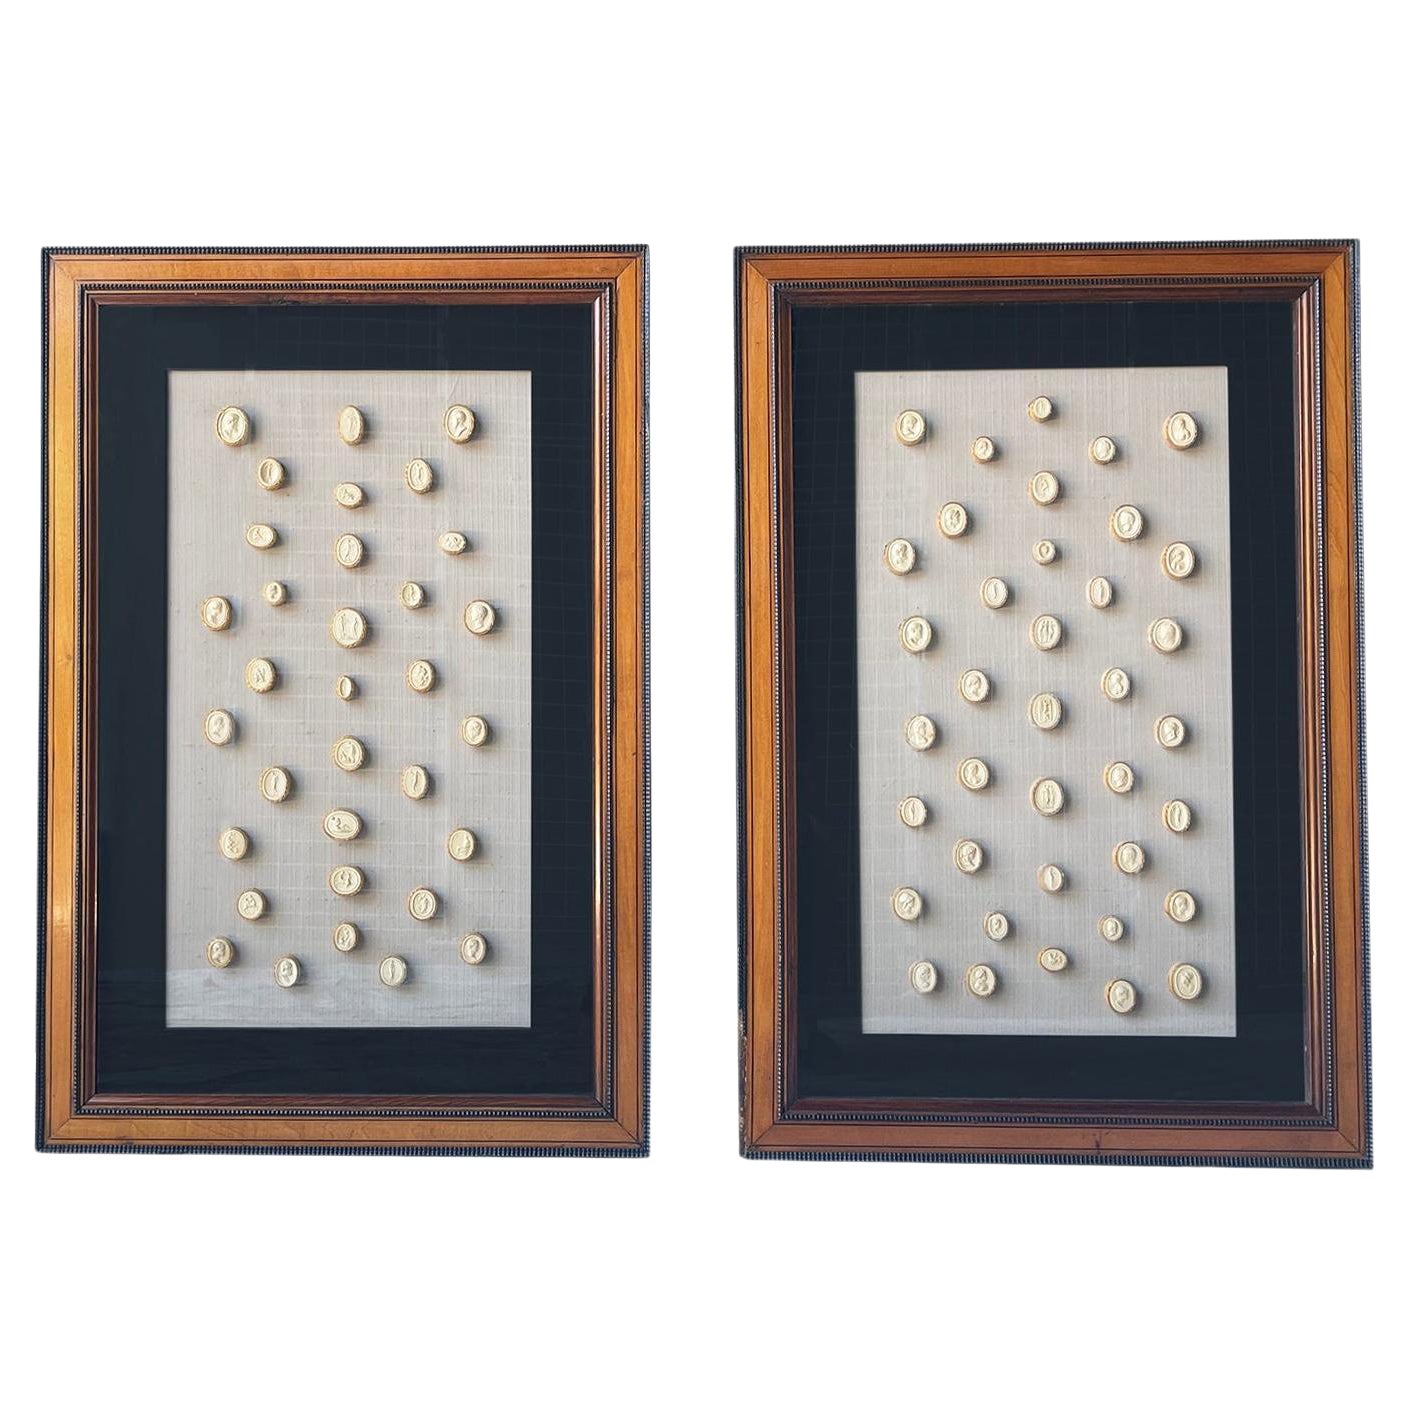 19th Century Pair of Framed Grand Tour Intaglios, Antique Wall Décor